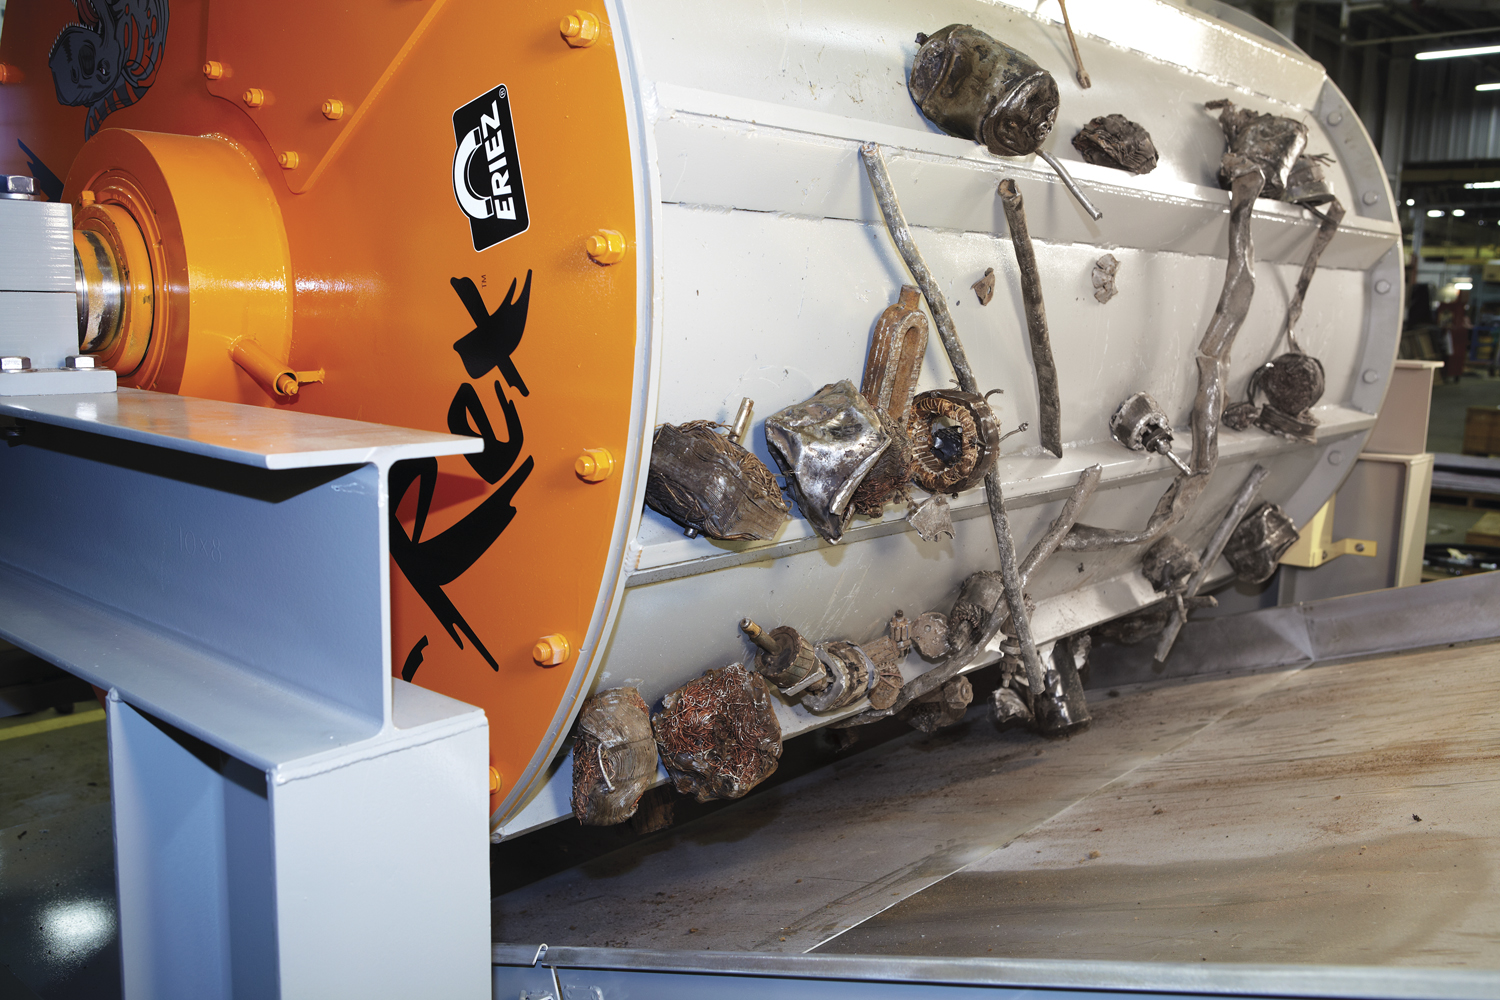 Eriez Offers Solution to Meatball Problems with New Scrap Drum